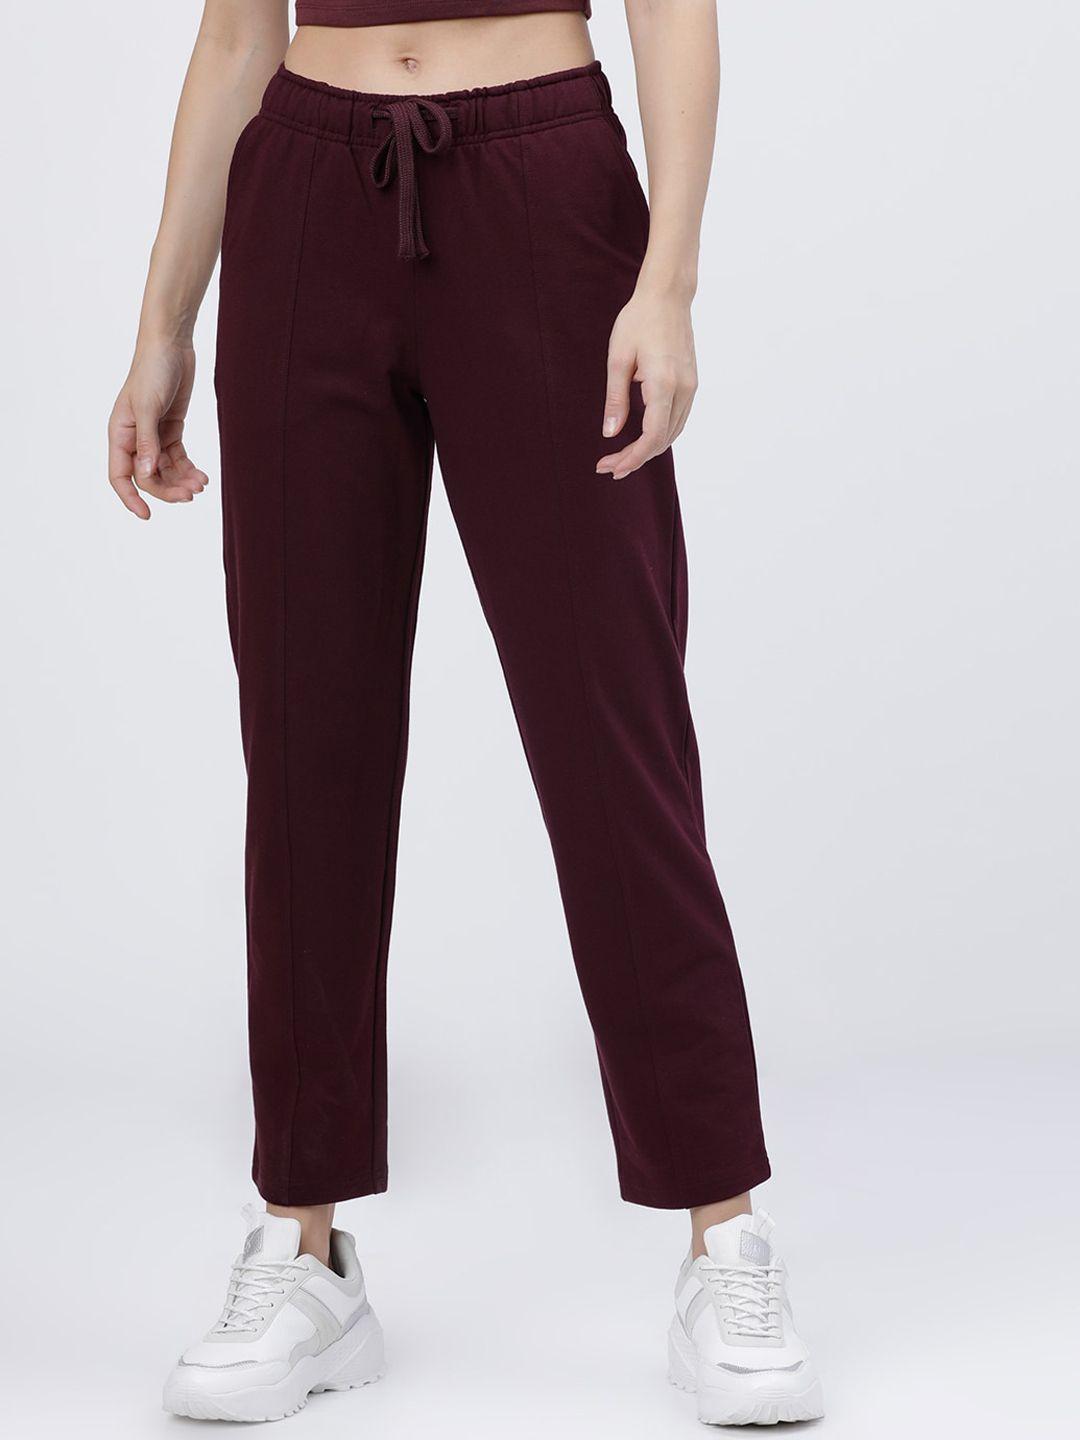 tokyo talkies women maroon solid port royale casual straight fit track pants